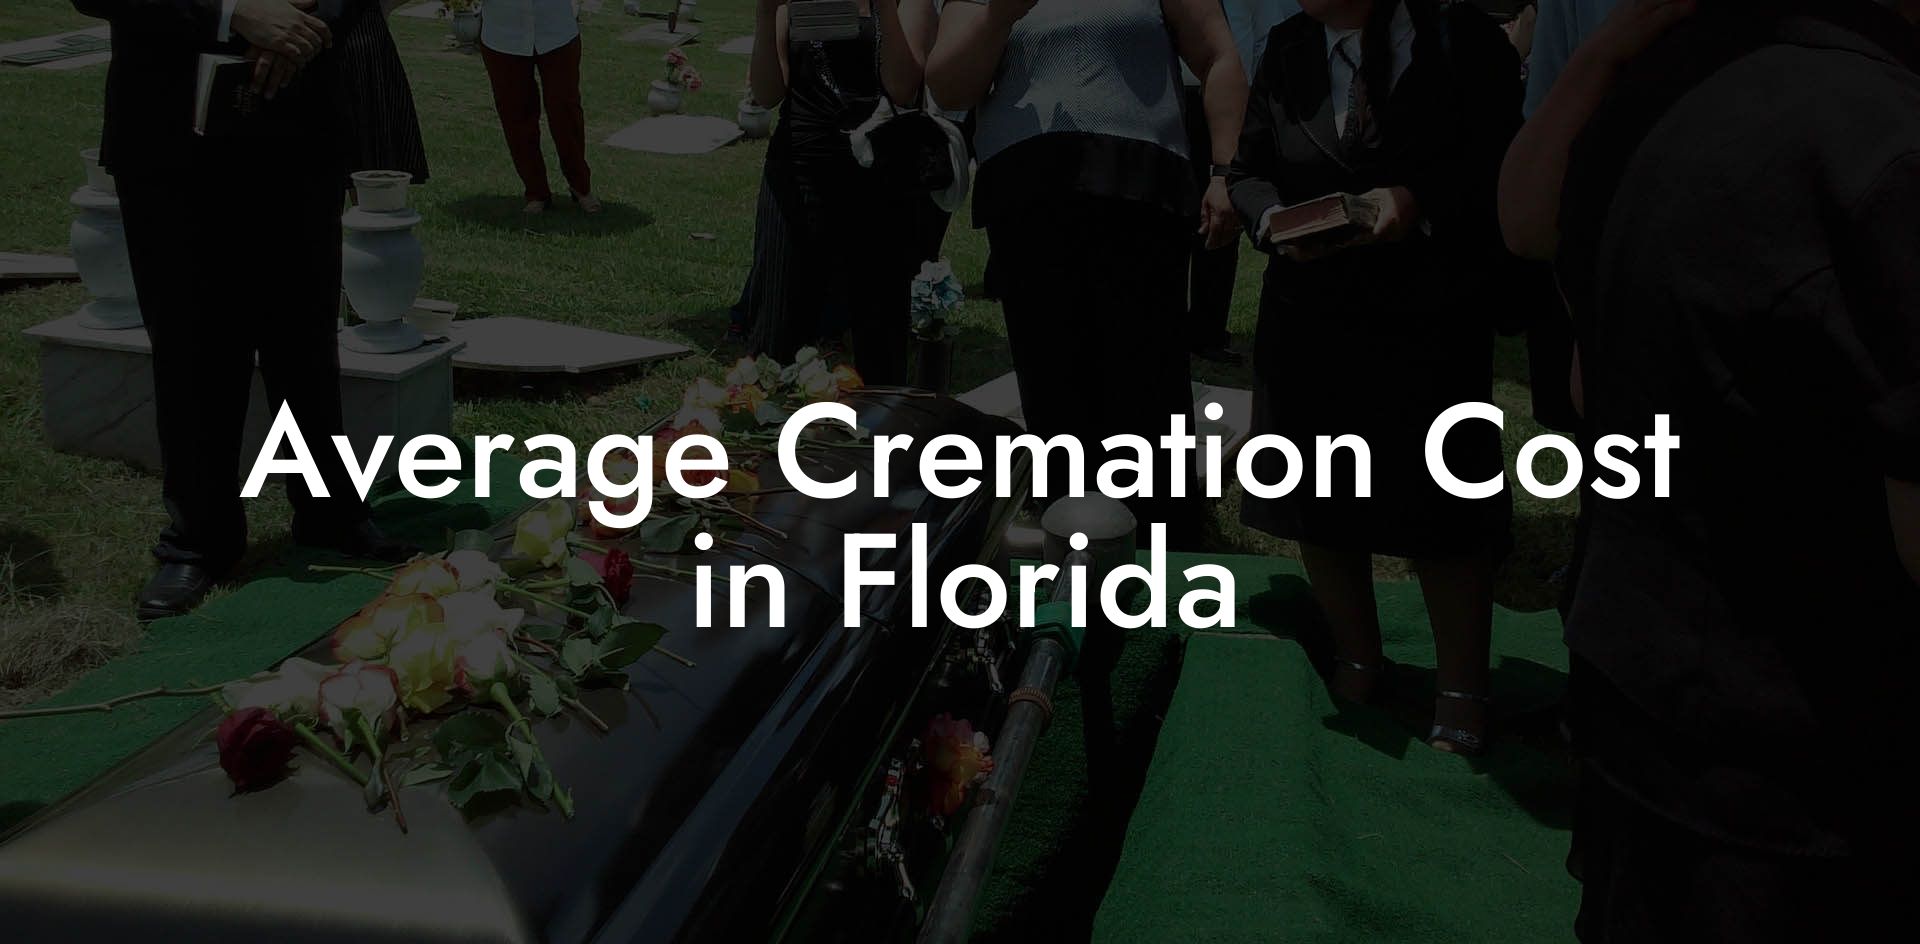 Average Cremation Cost in Florida